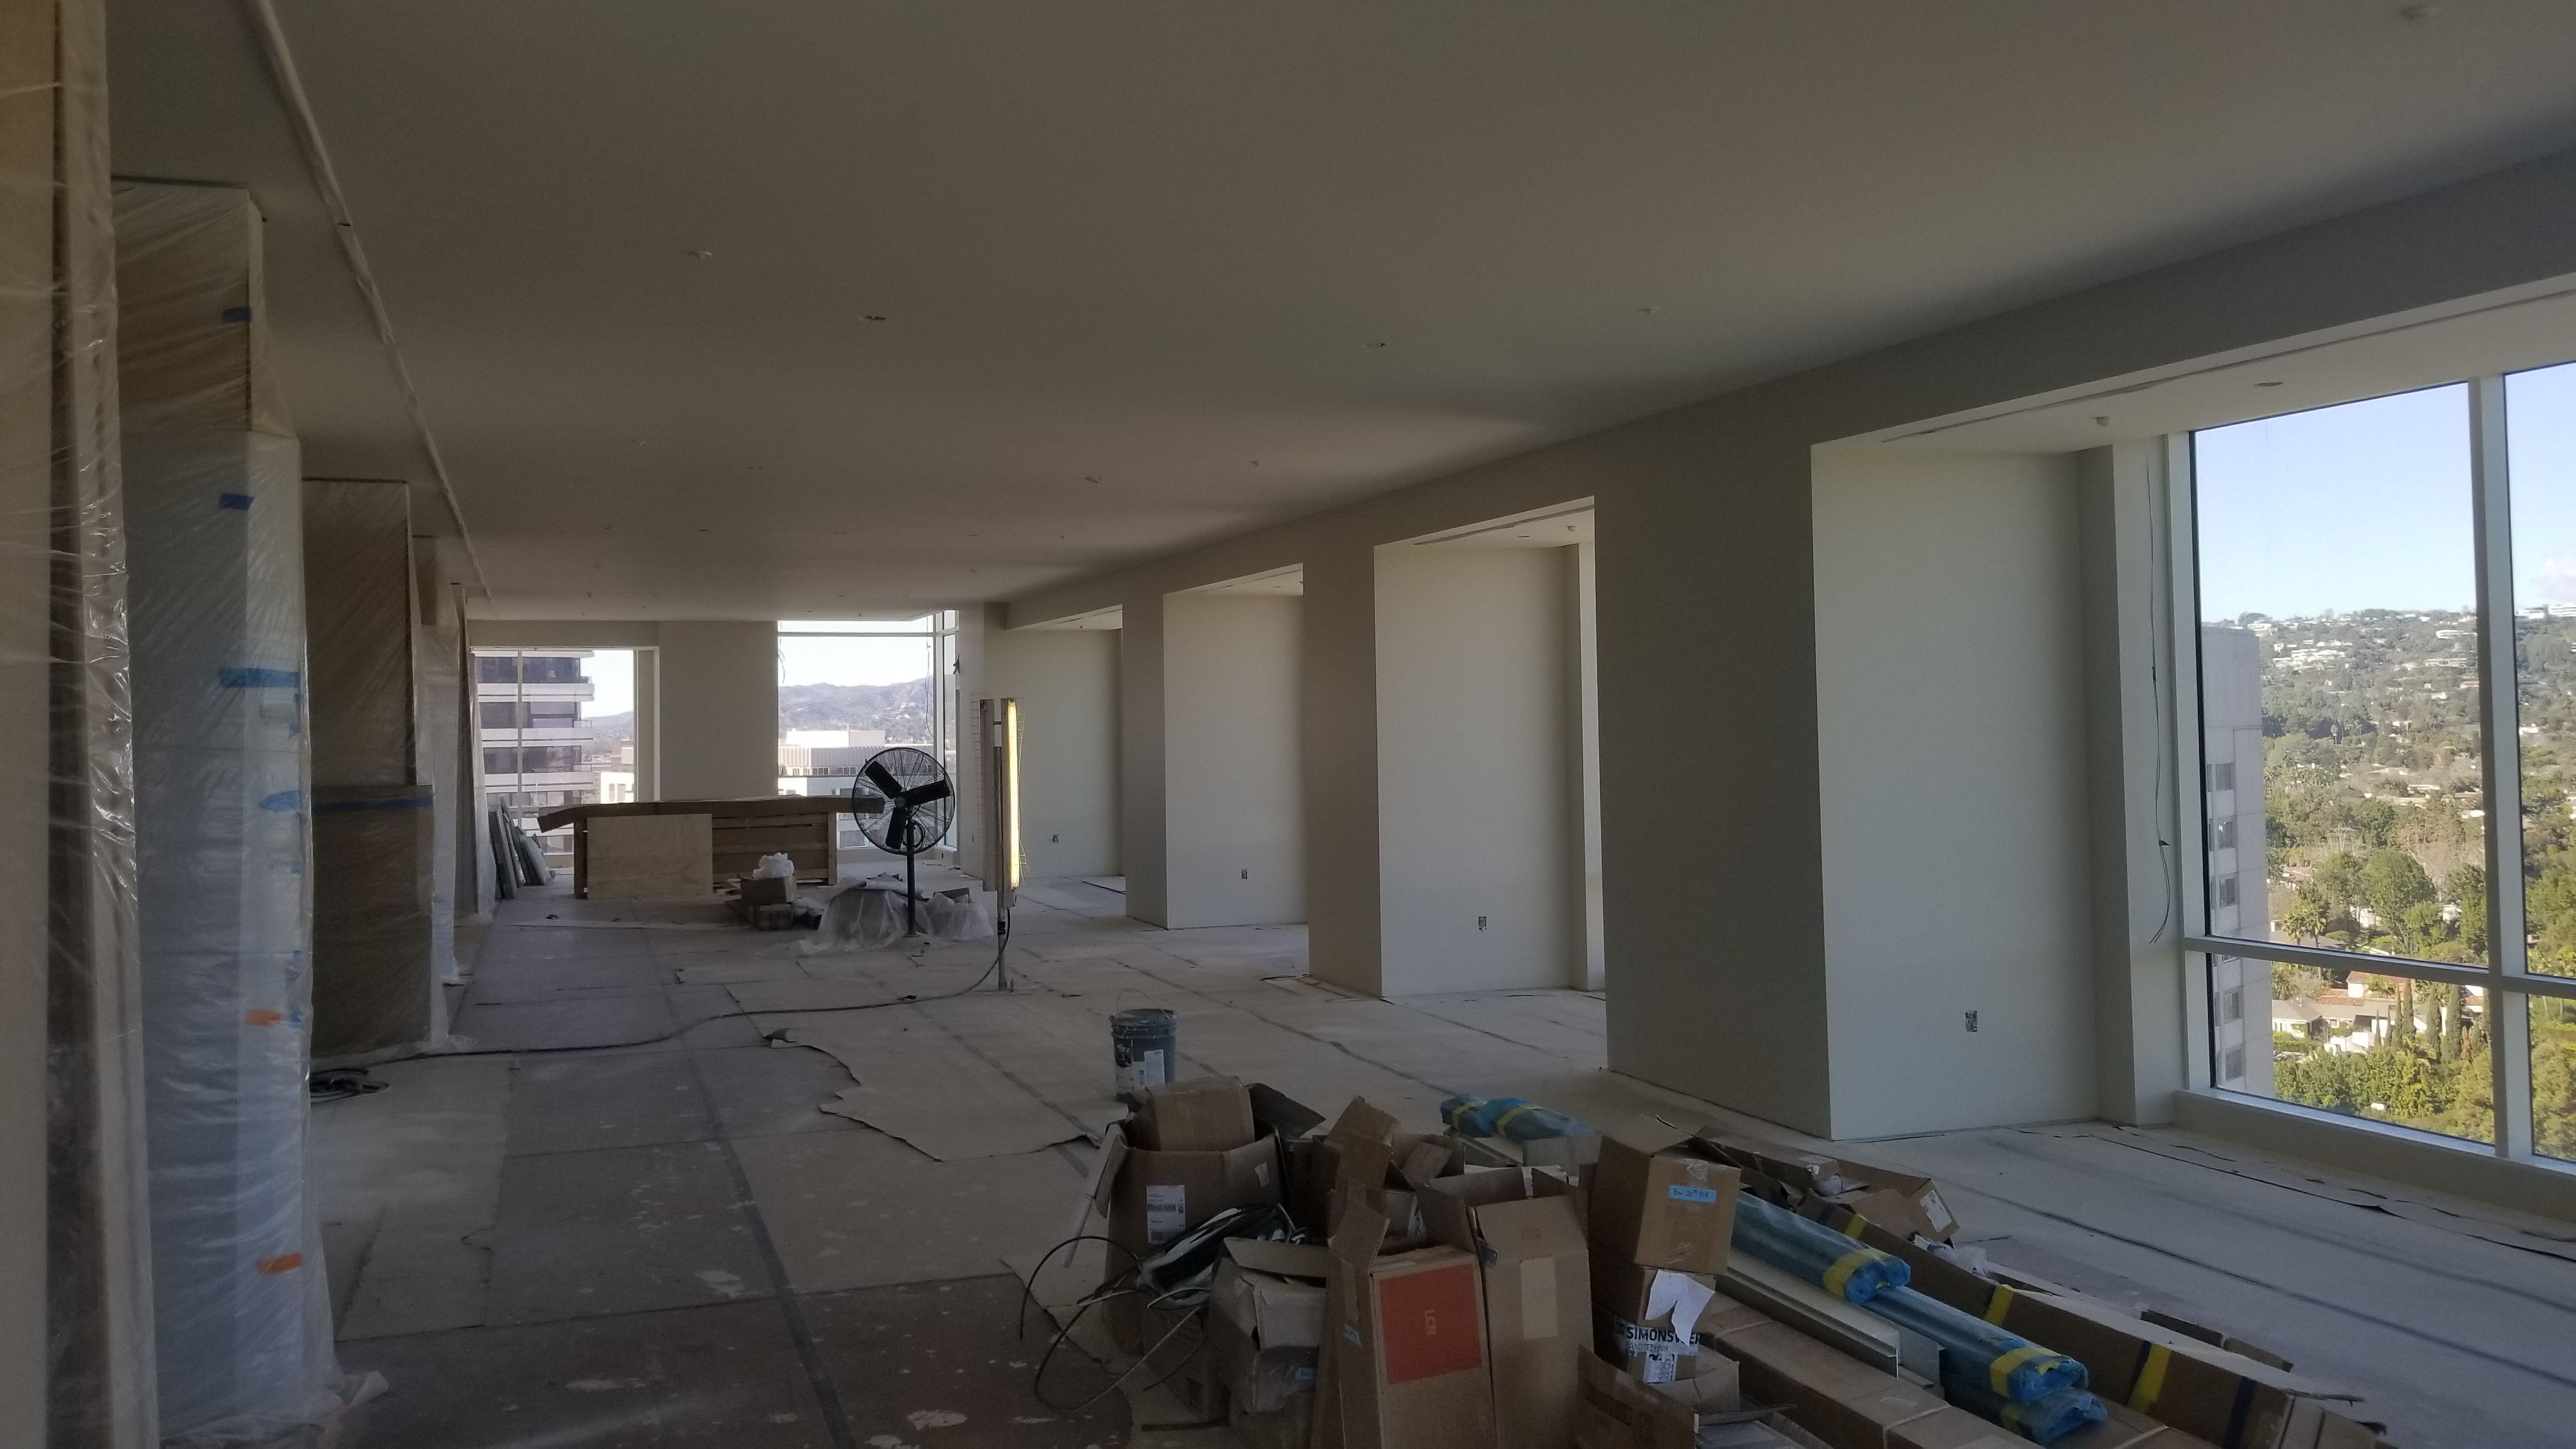 Image of Residential Drywall Construction, Sierra Drywall Inc, Residential Drywall Contractors